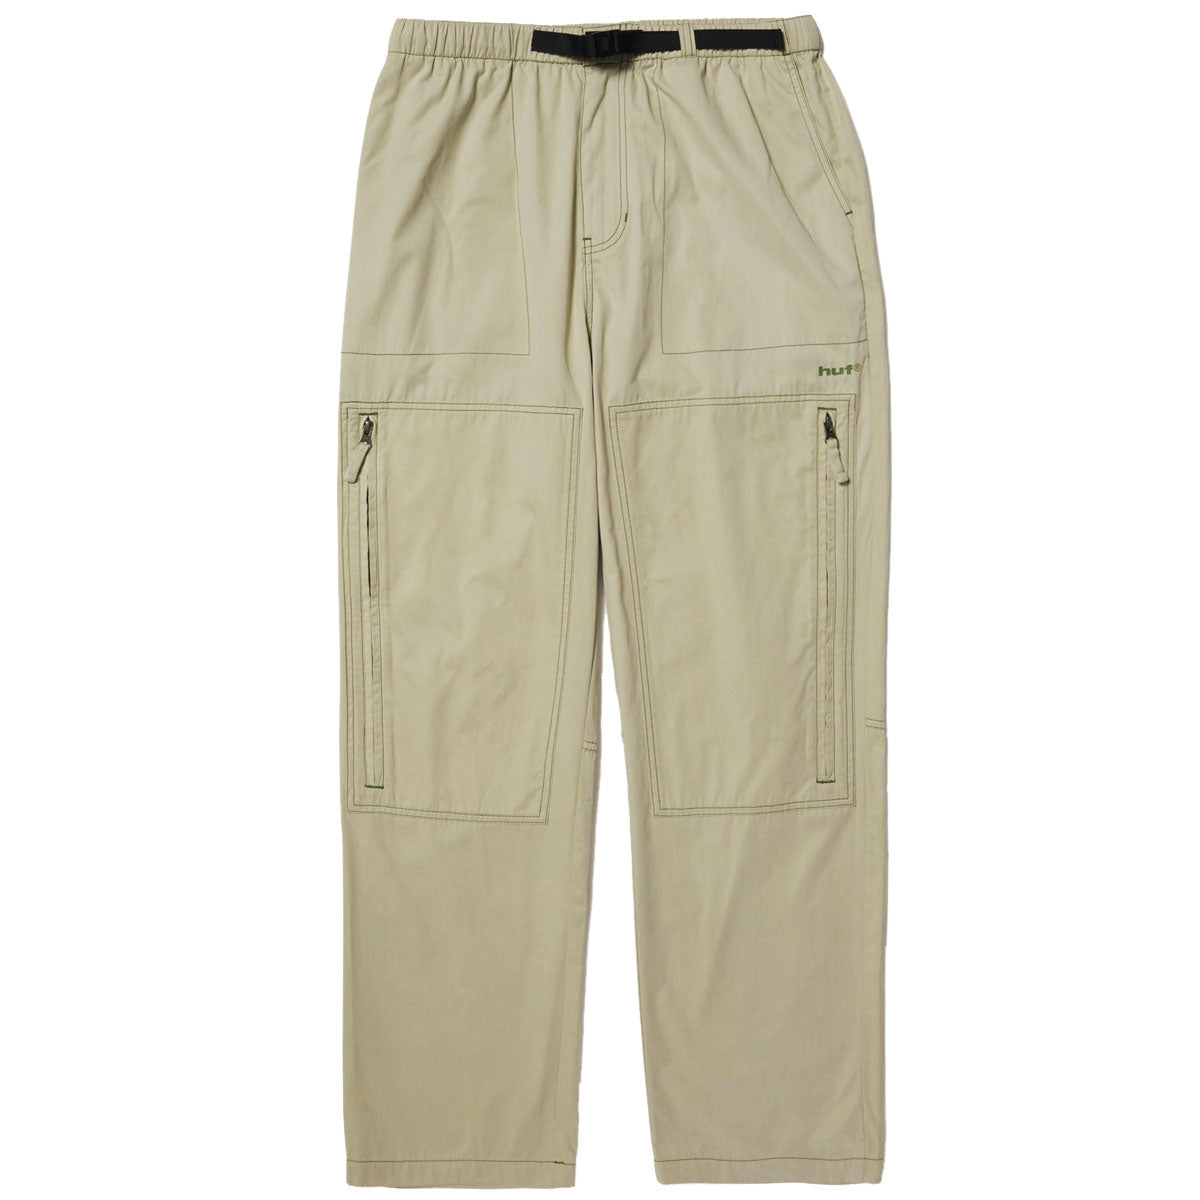 HUF Loma Tech Pants - Biscuit image 1